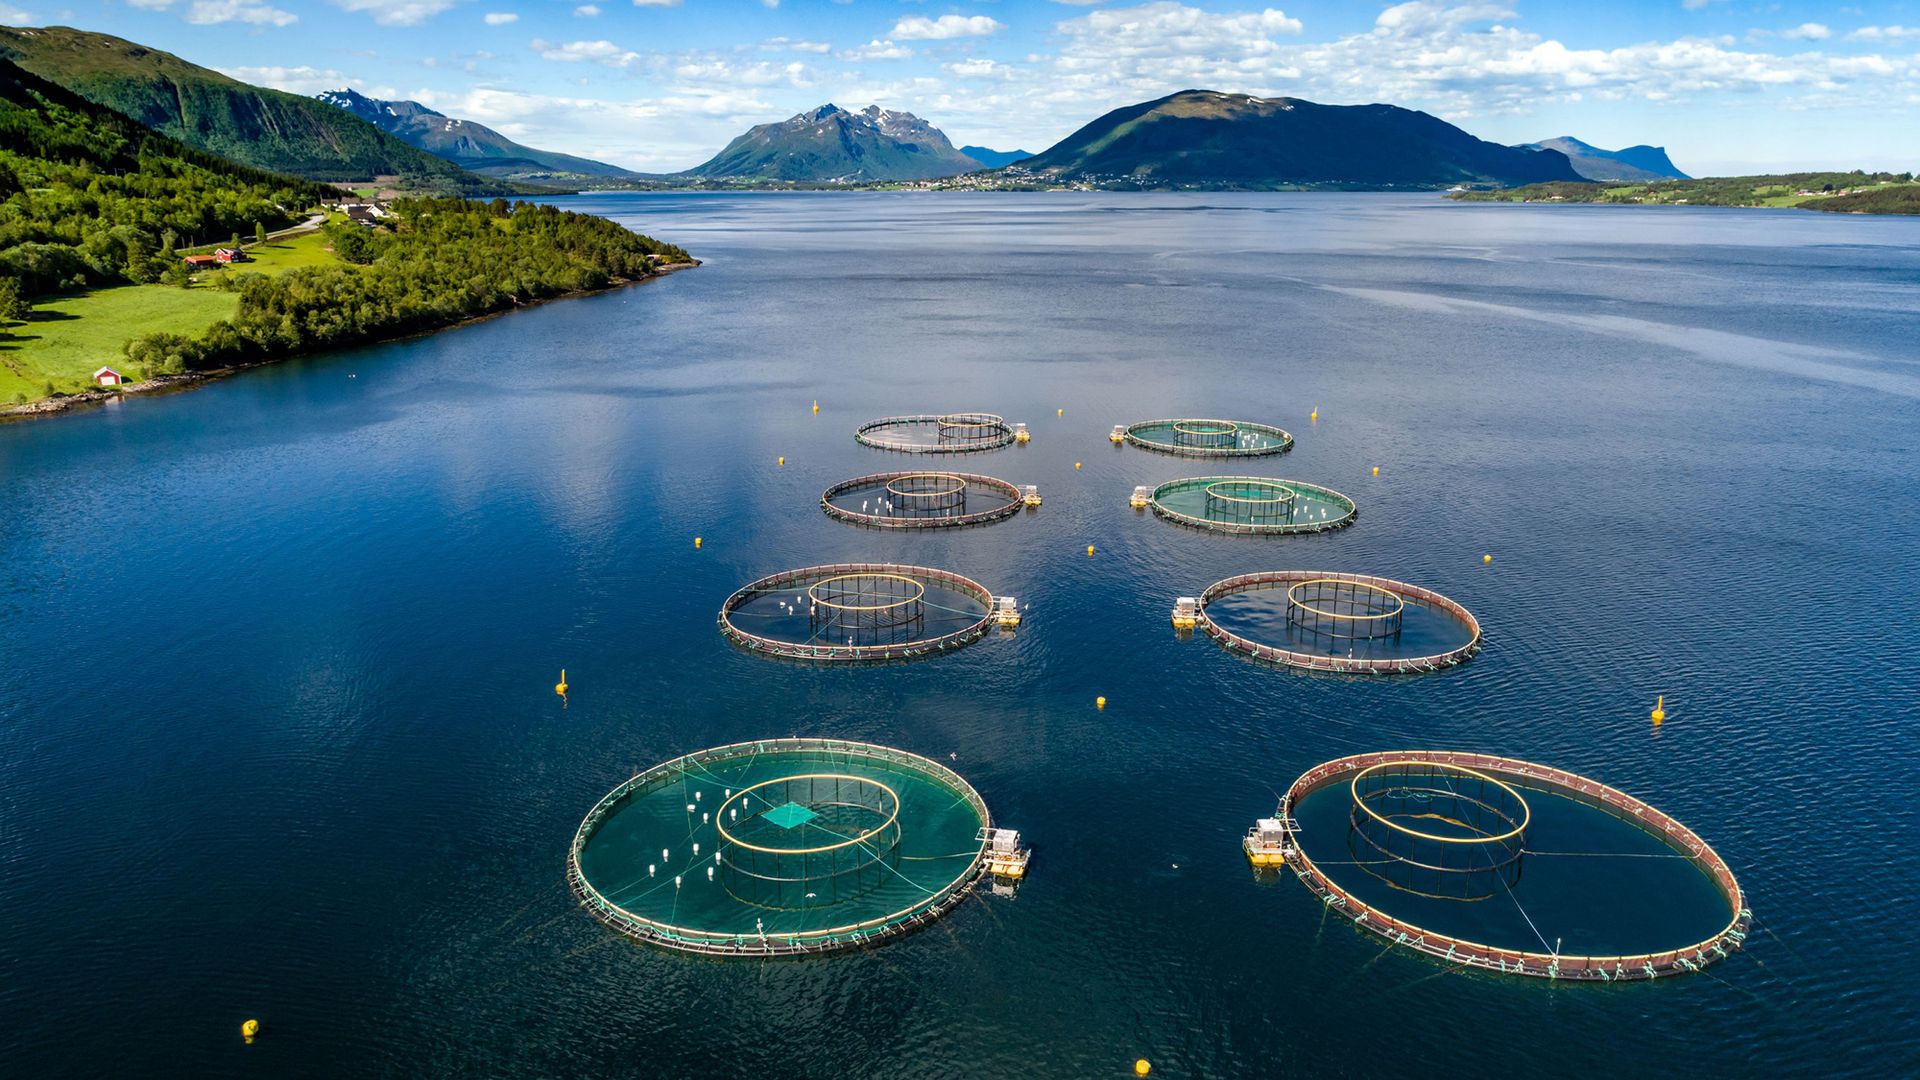 Image of a Norwegian aquaculture farm from above